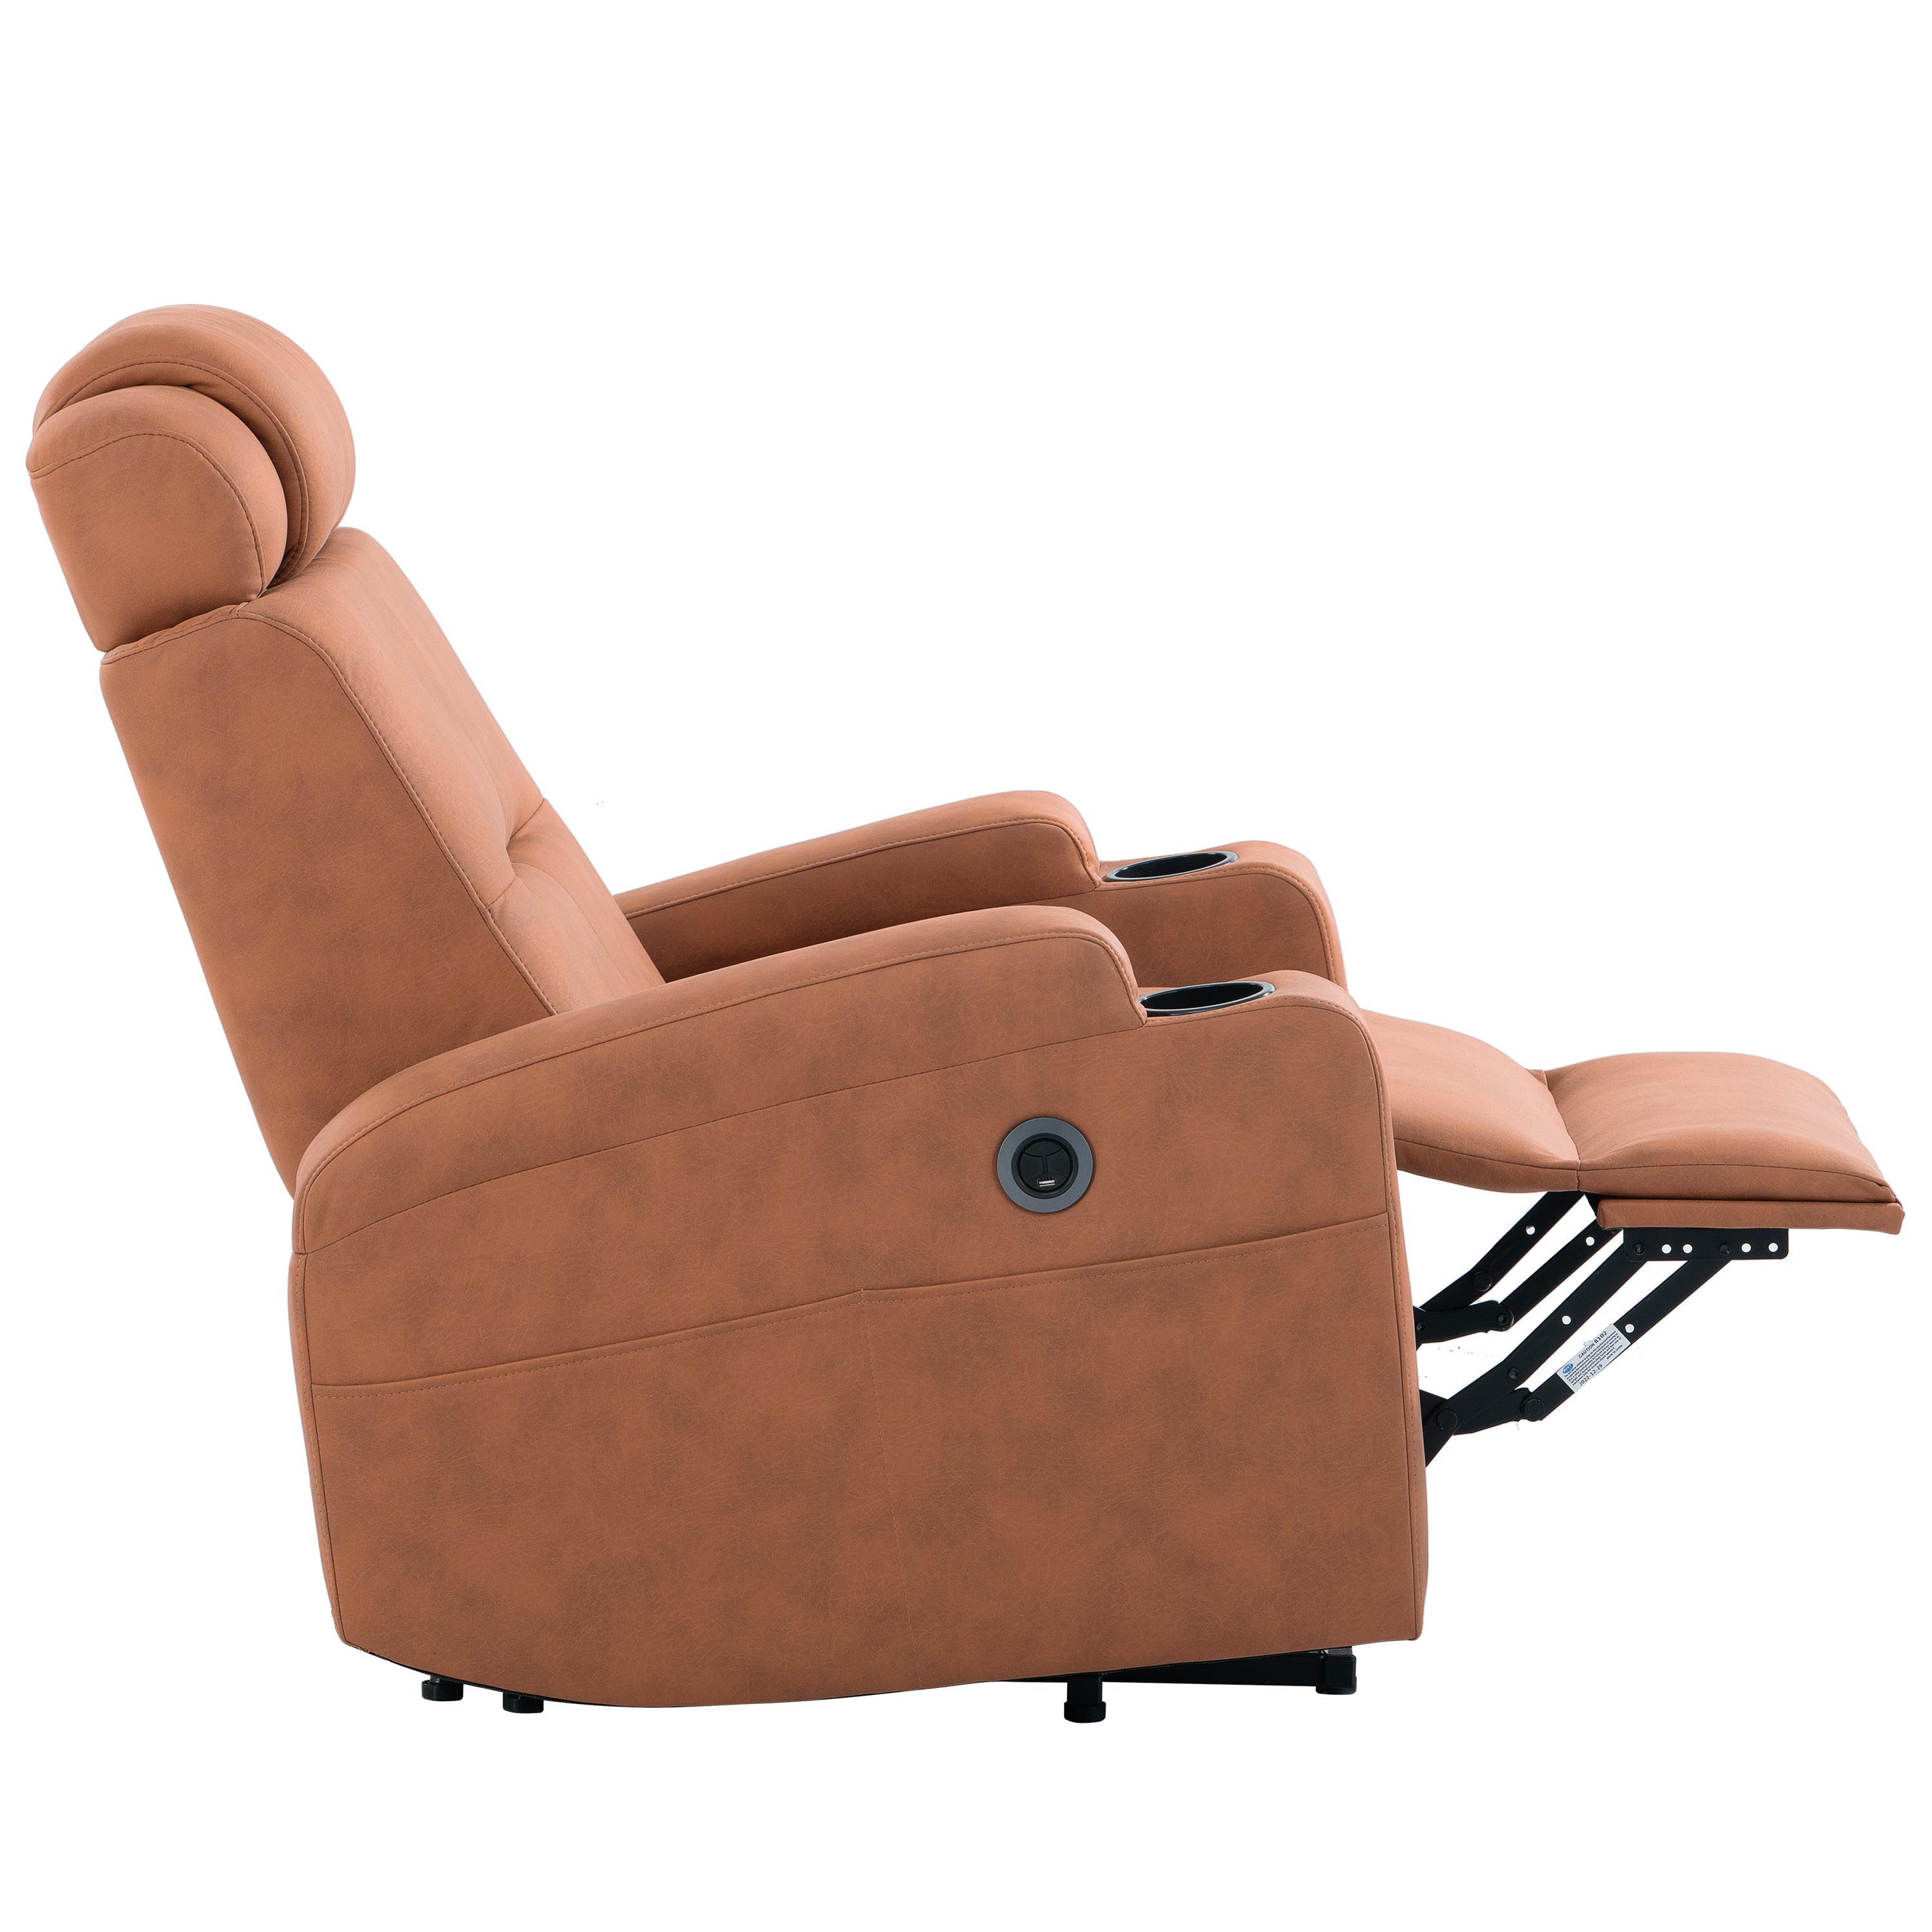 Orange Power Lift Chair Right Profile with Footrest Extended